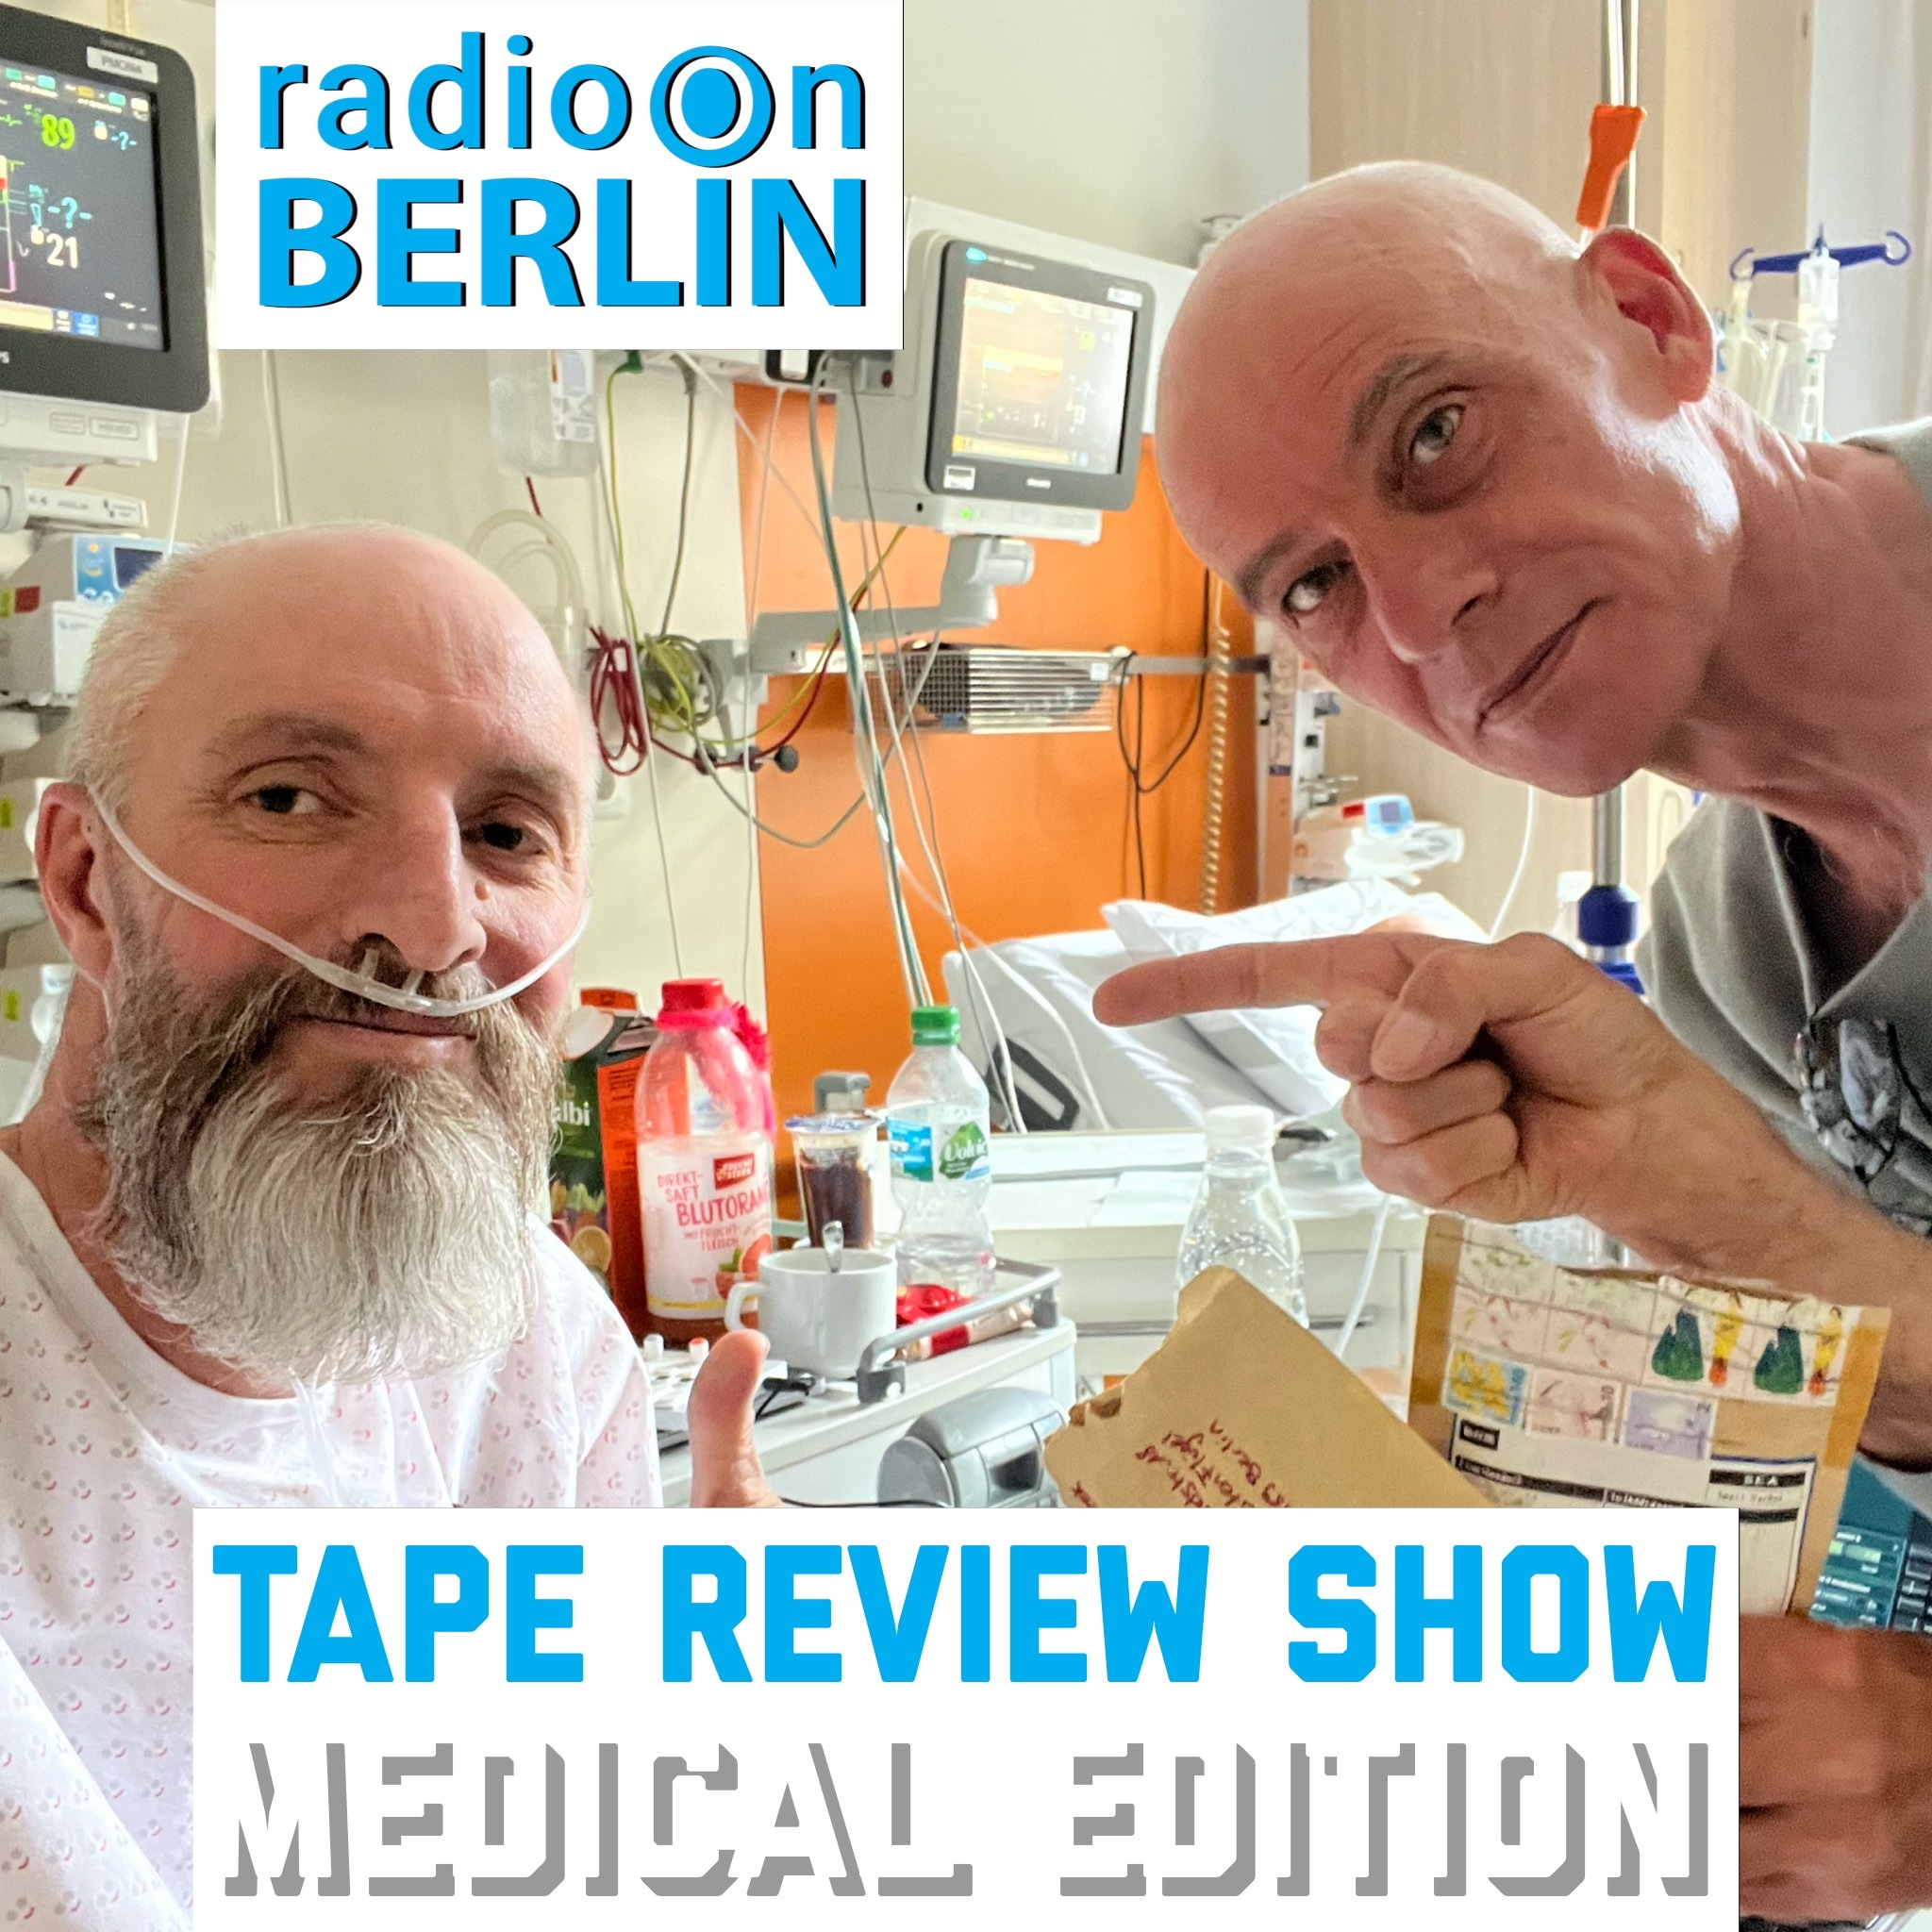 Tape_review_medical8h8is.jpg